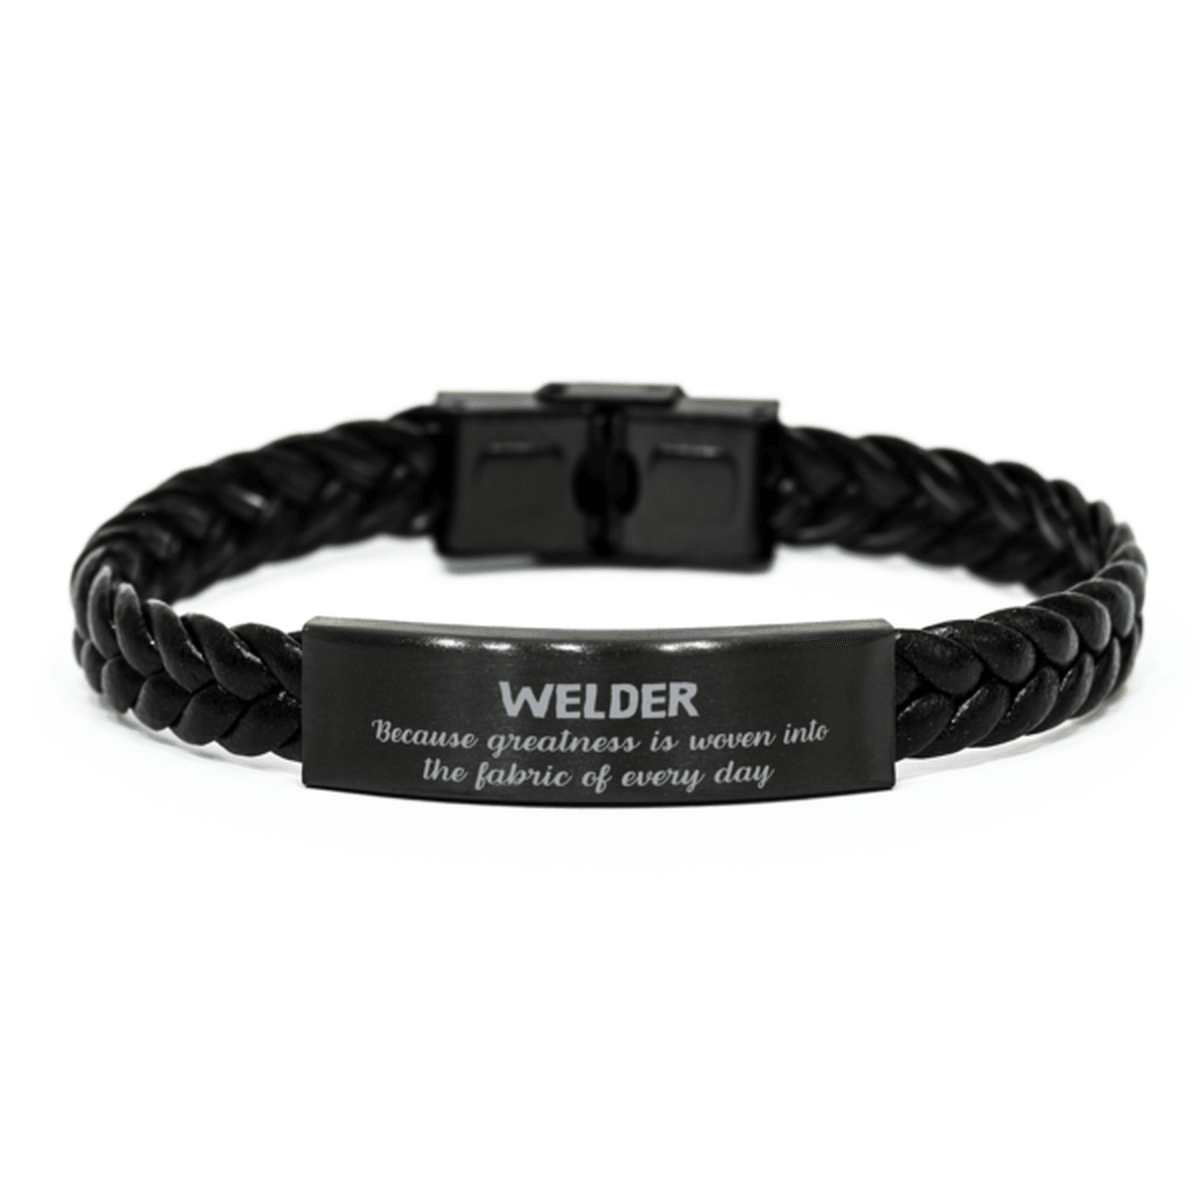 Sarcastic Welder Braided Leather Bracelet Gifts, Christmas Holiday Gifts for Welder Birthday, Welder: Because greatness is woven into the fabric of every day, Coworkers, Friends - Mallard Moon Gift Shop